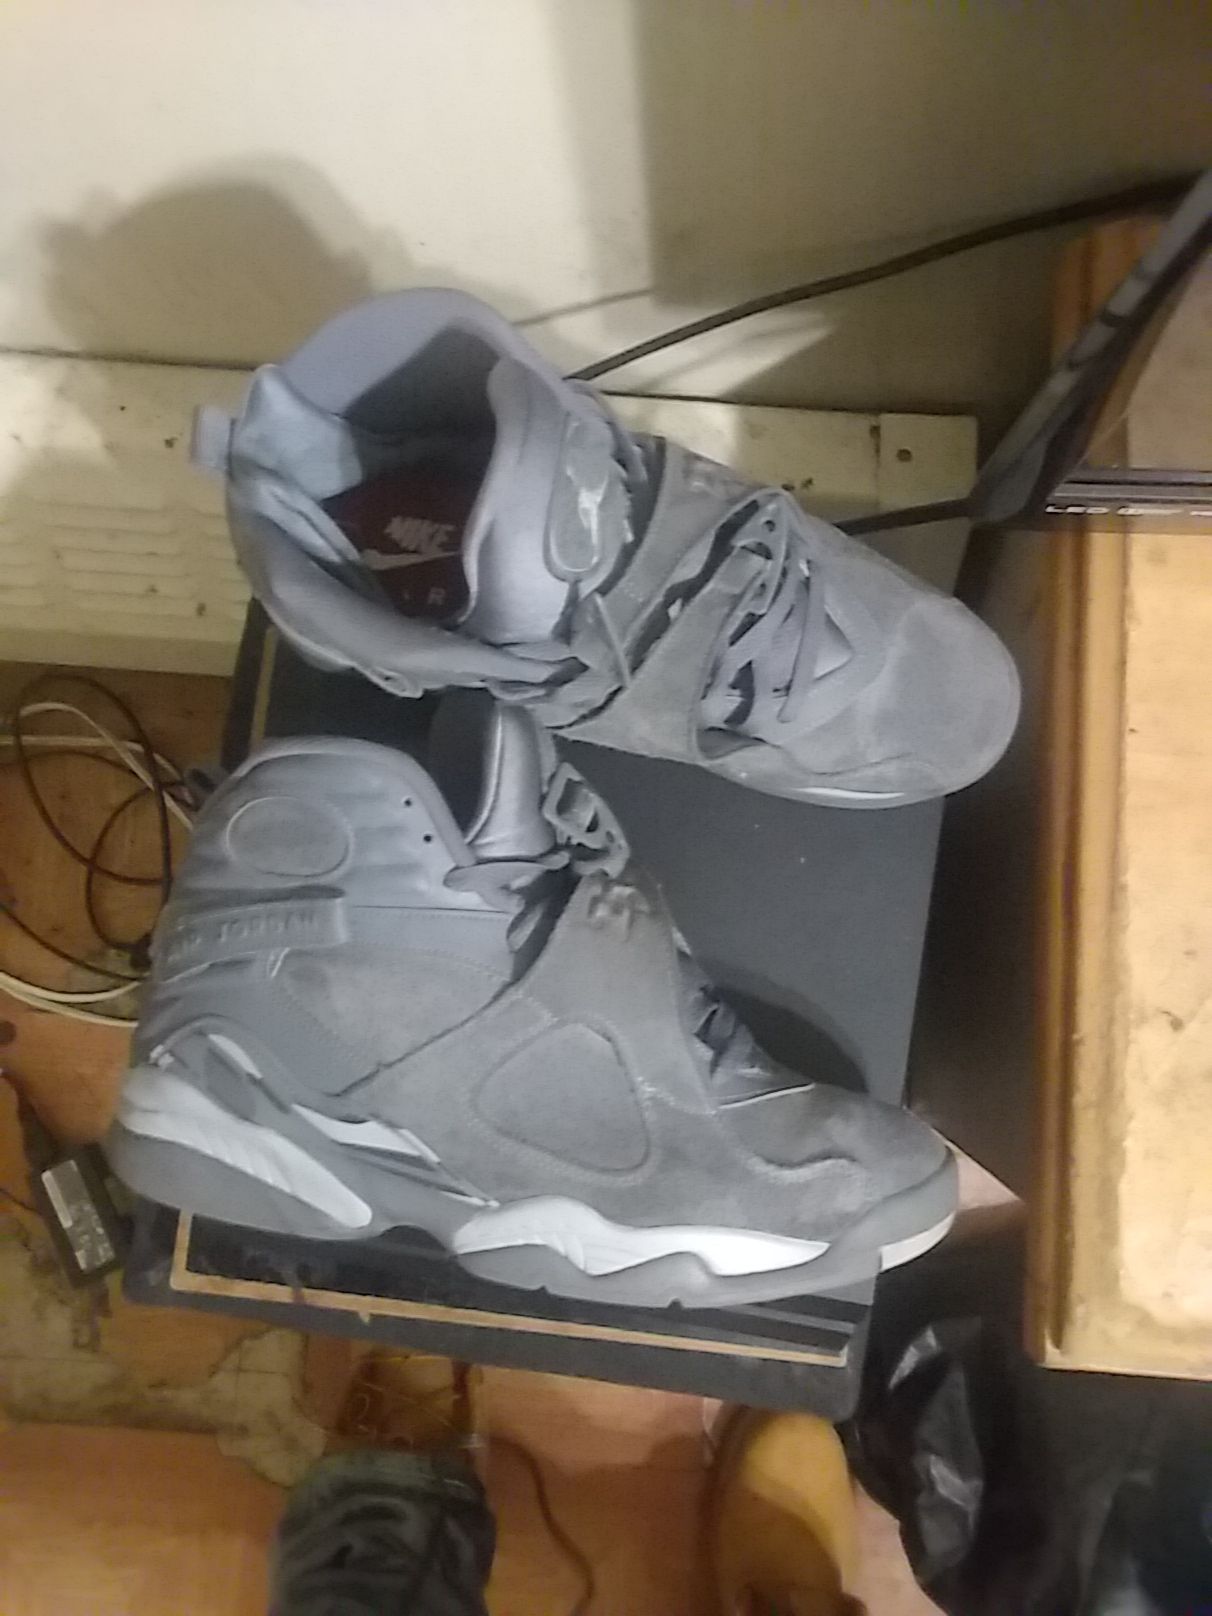 Jordan 8s for sale only $150 size 10